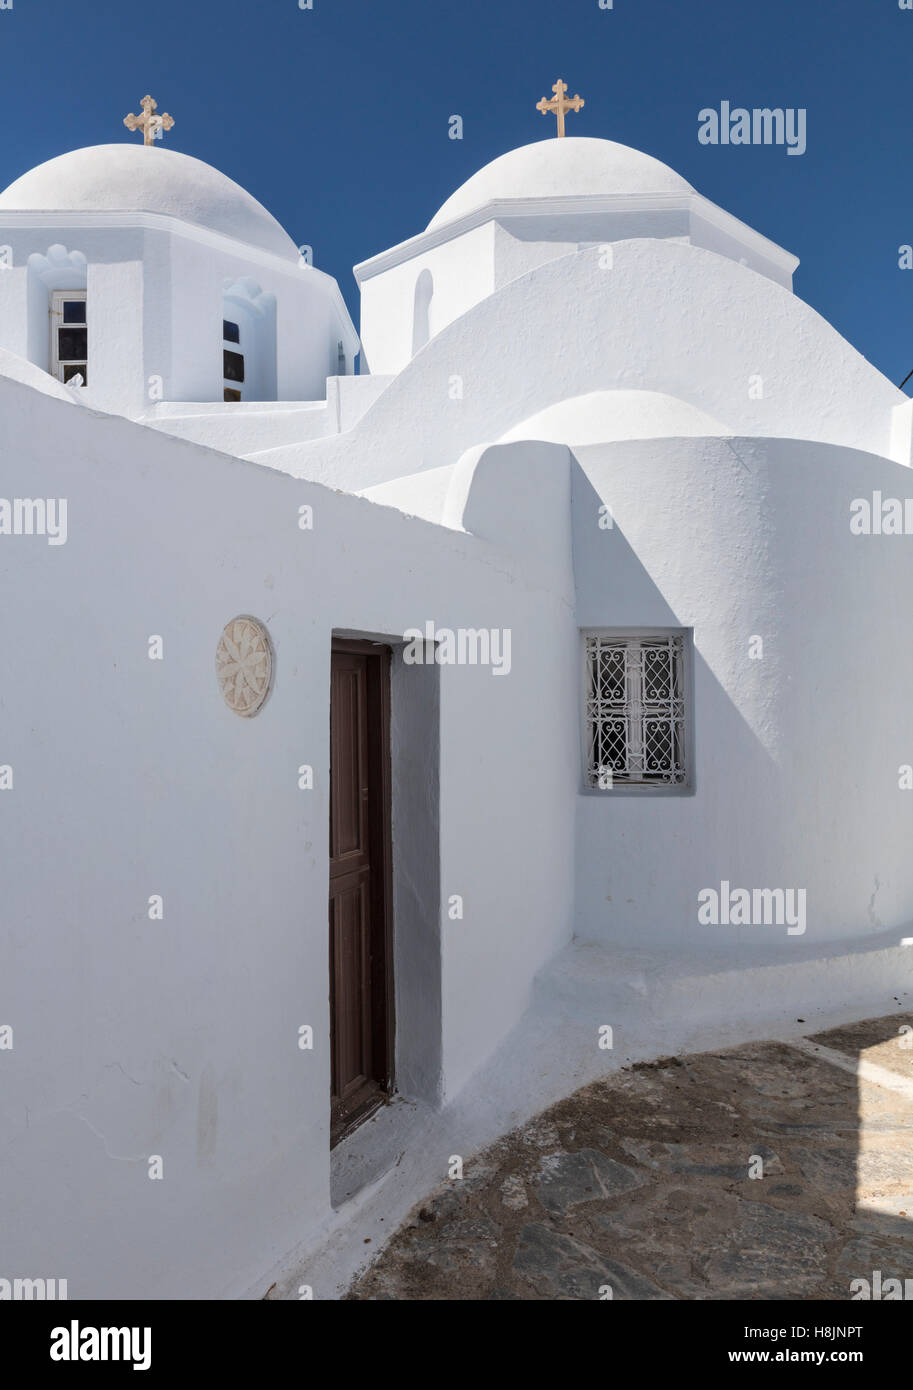 Twin church domes in the whitewashed village of Chora (Hora) on Amorgos, one of the Cyclades islands of Greece Stock Photo